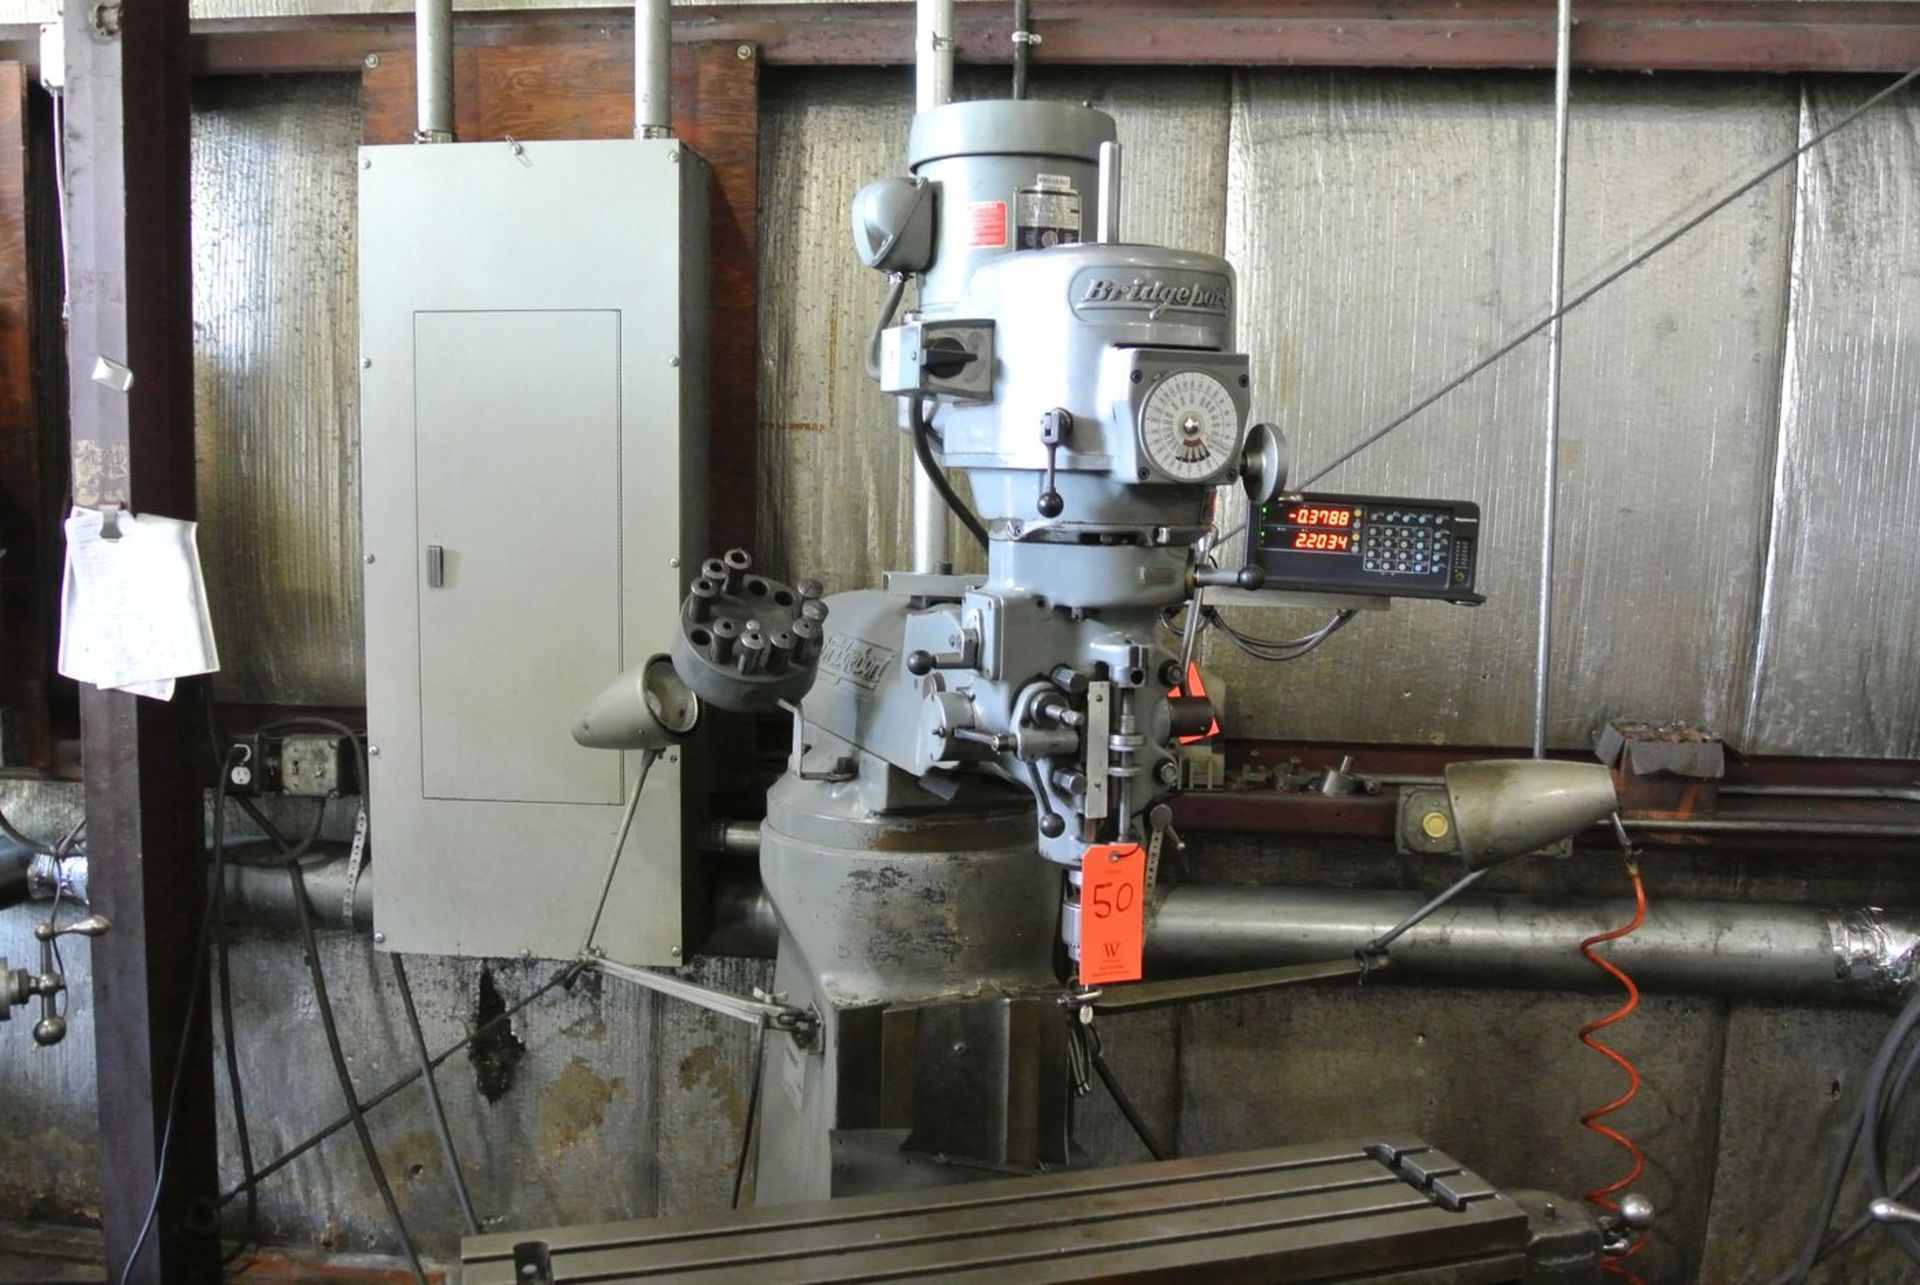 Bridgeport 1-1/2 HP Vertical Milling Machine, S/N: 12BR163788; with 42 in. x 9 in. T-Slot Production - Image 2 of 6